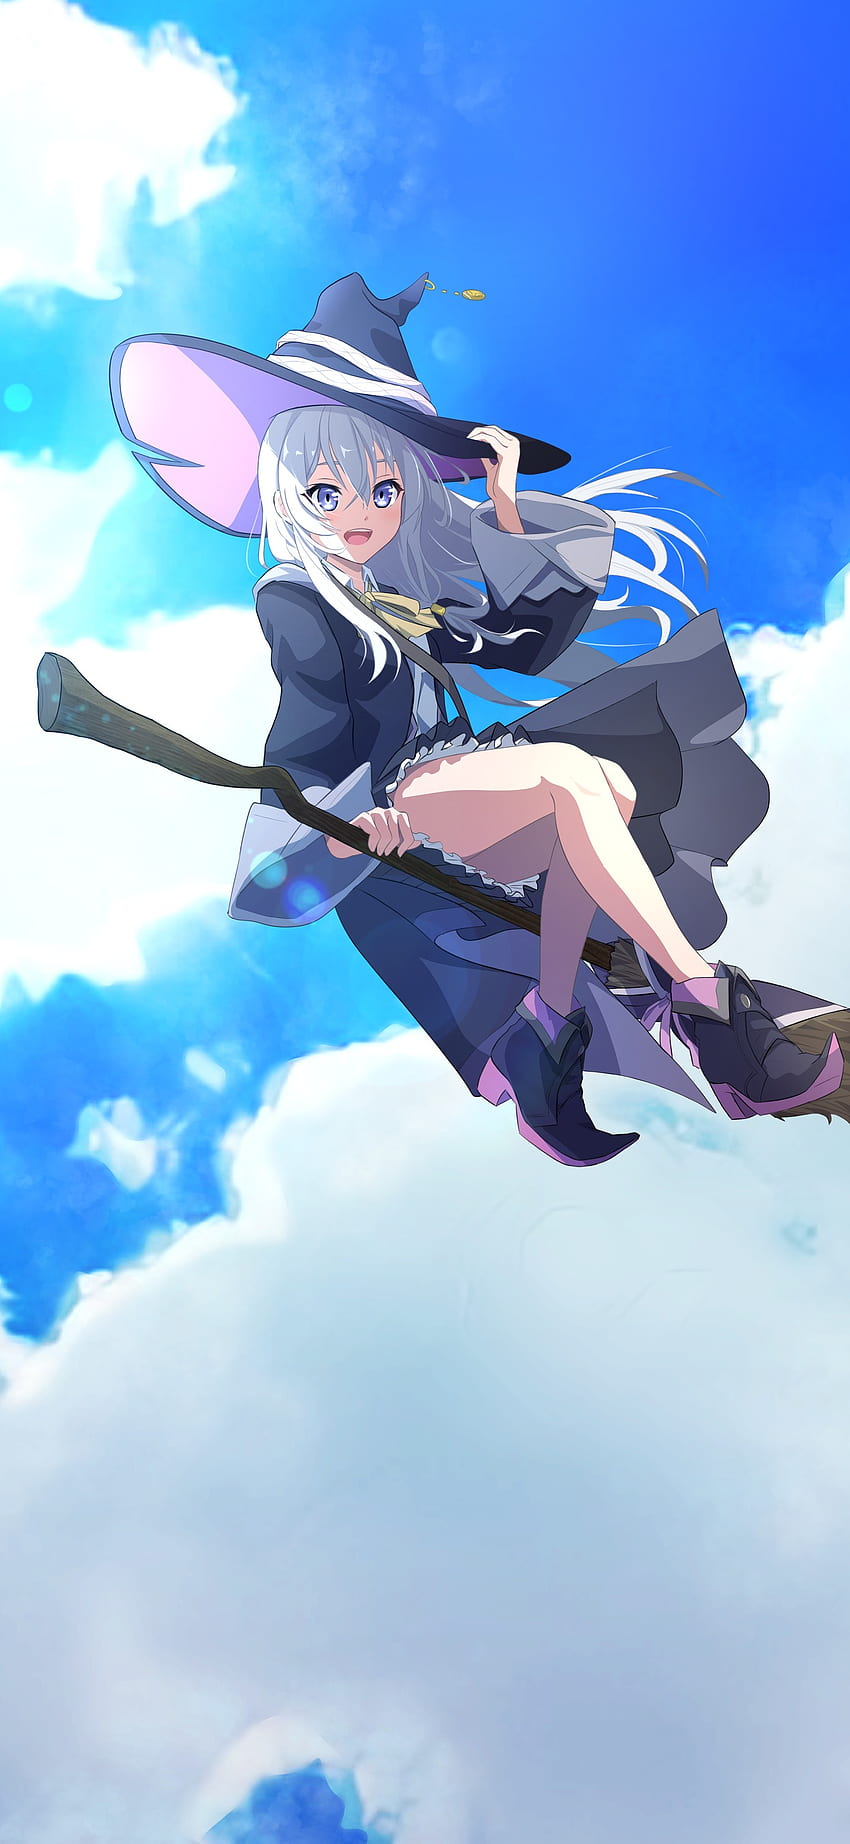 Anime Witch Images - Free Download on Freepik